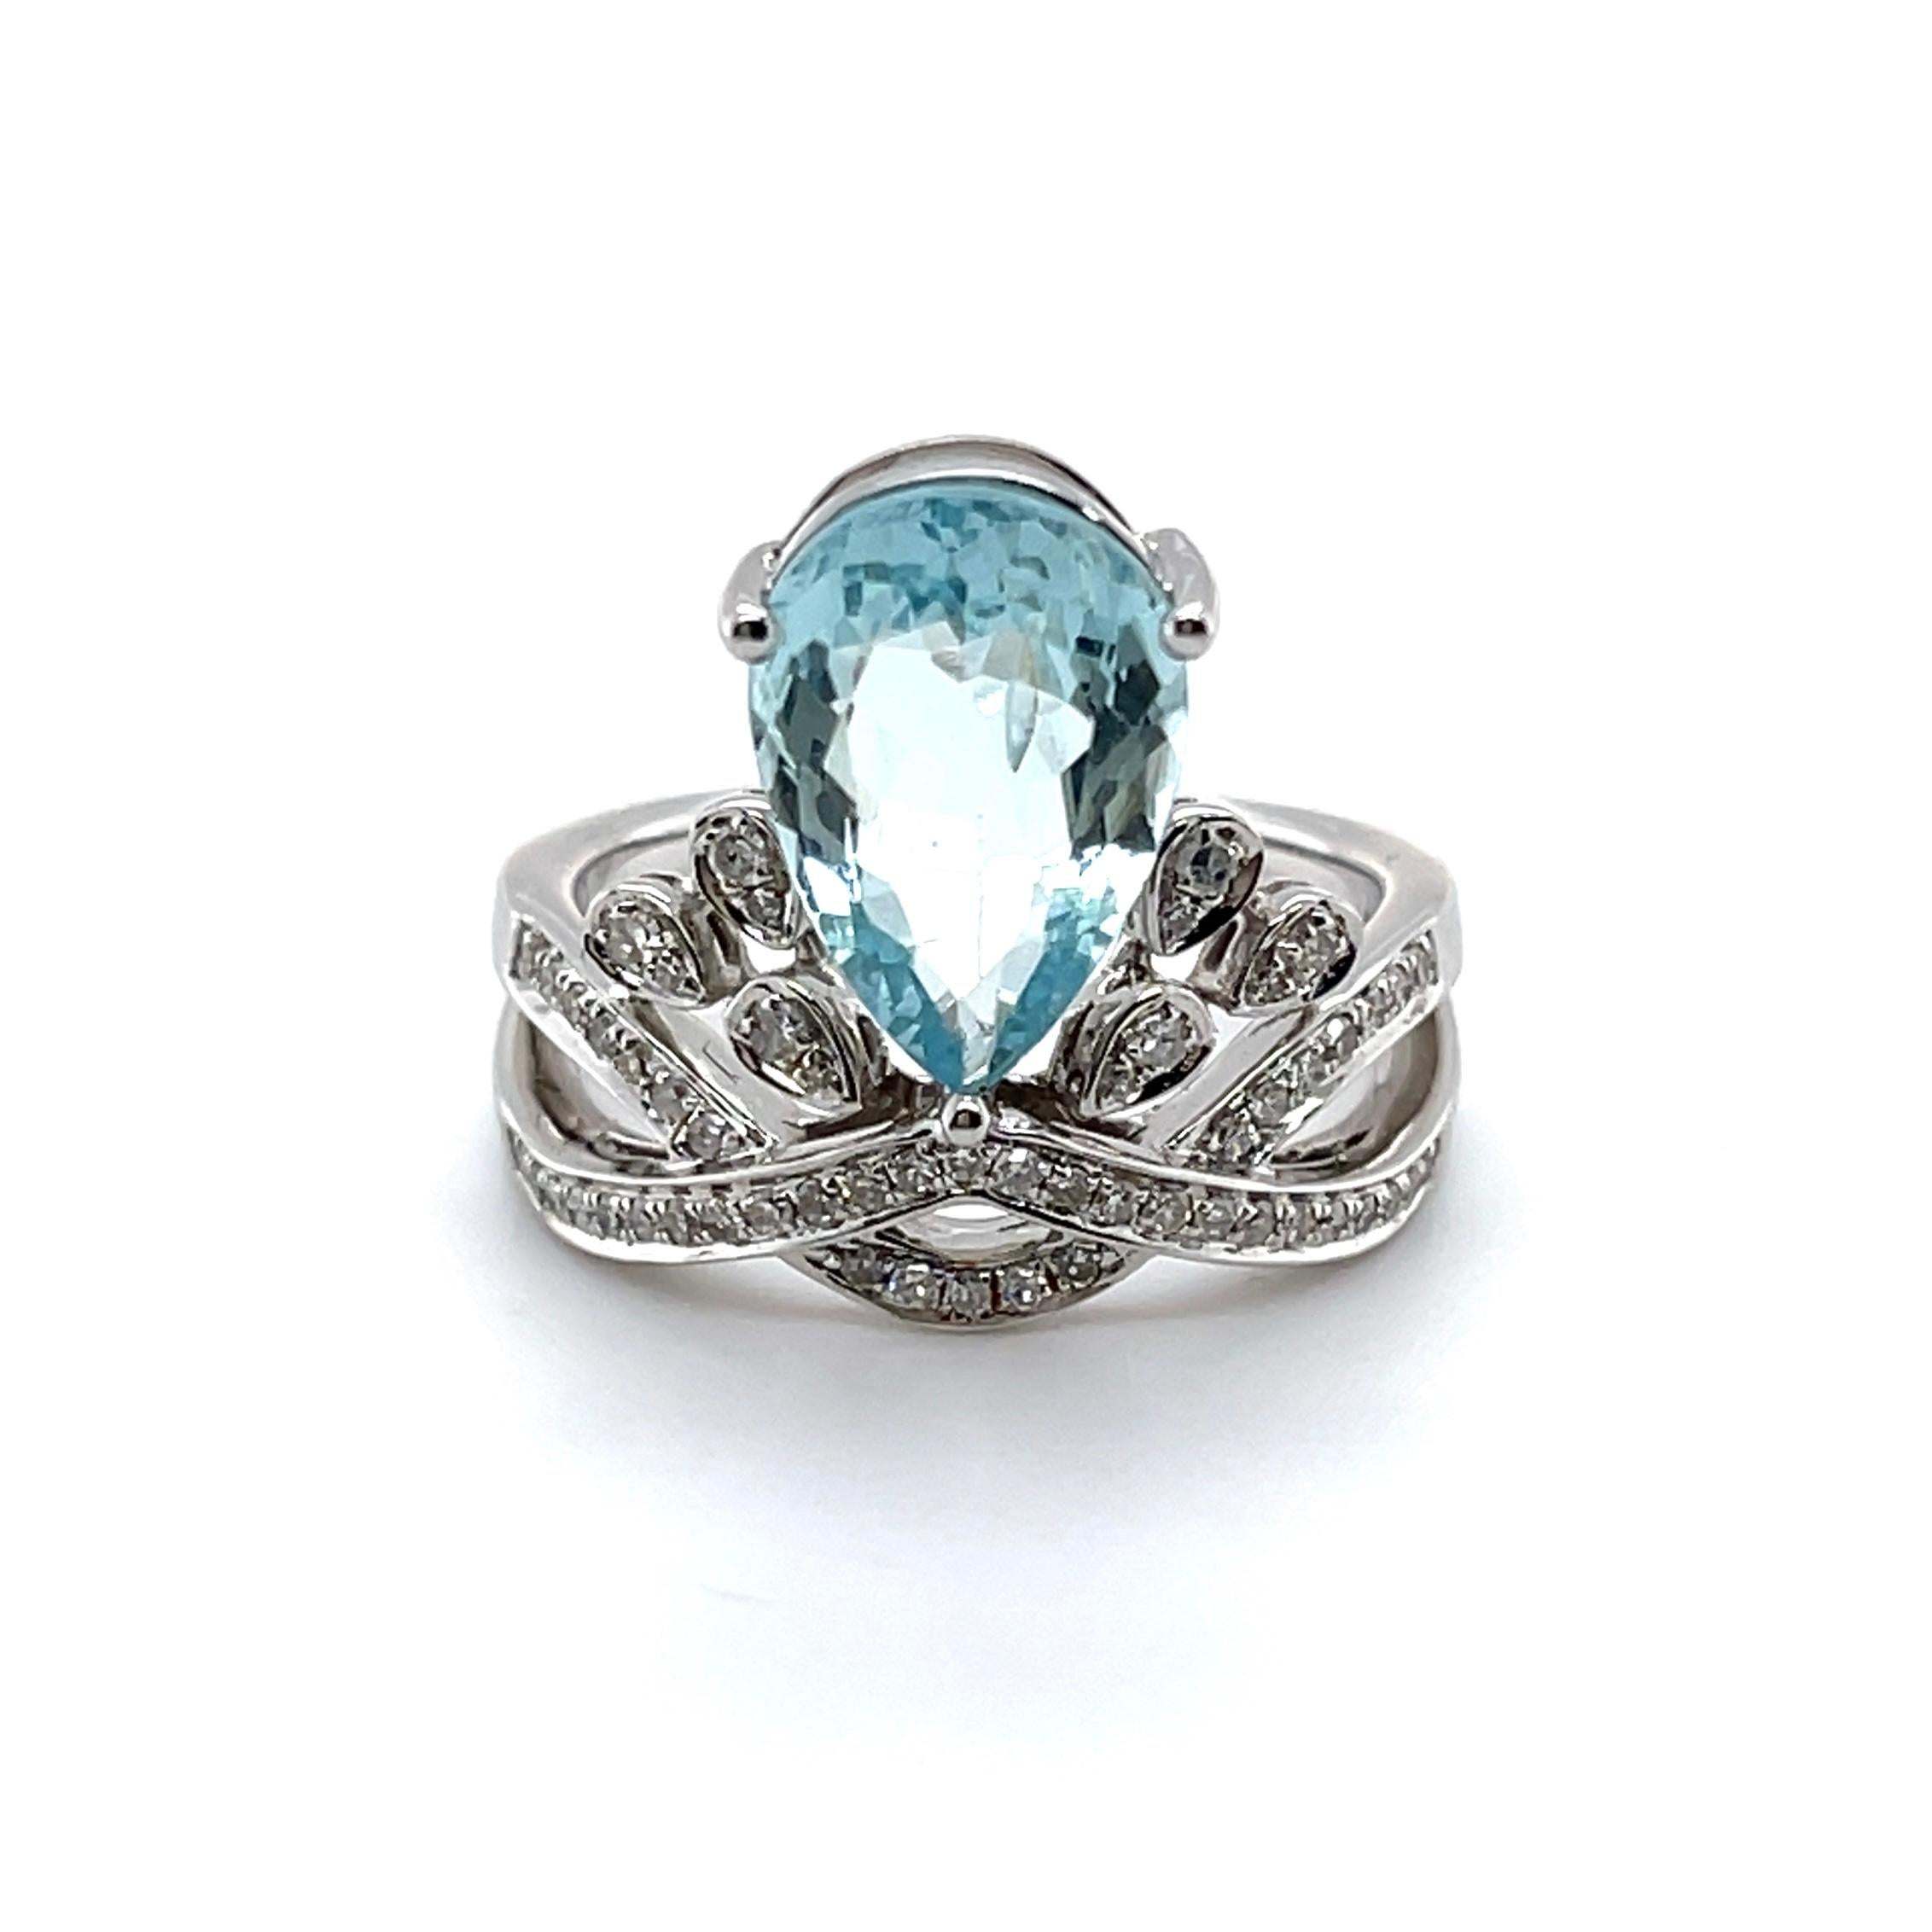 For Sale:  18ct White Gold Aquamarine and Diamond Ring